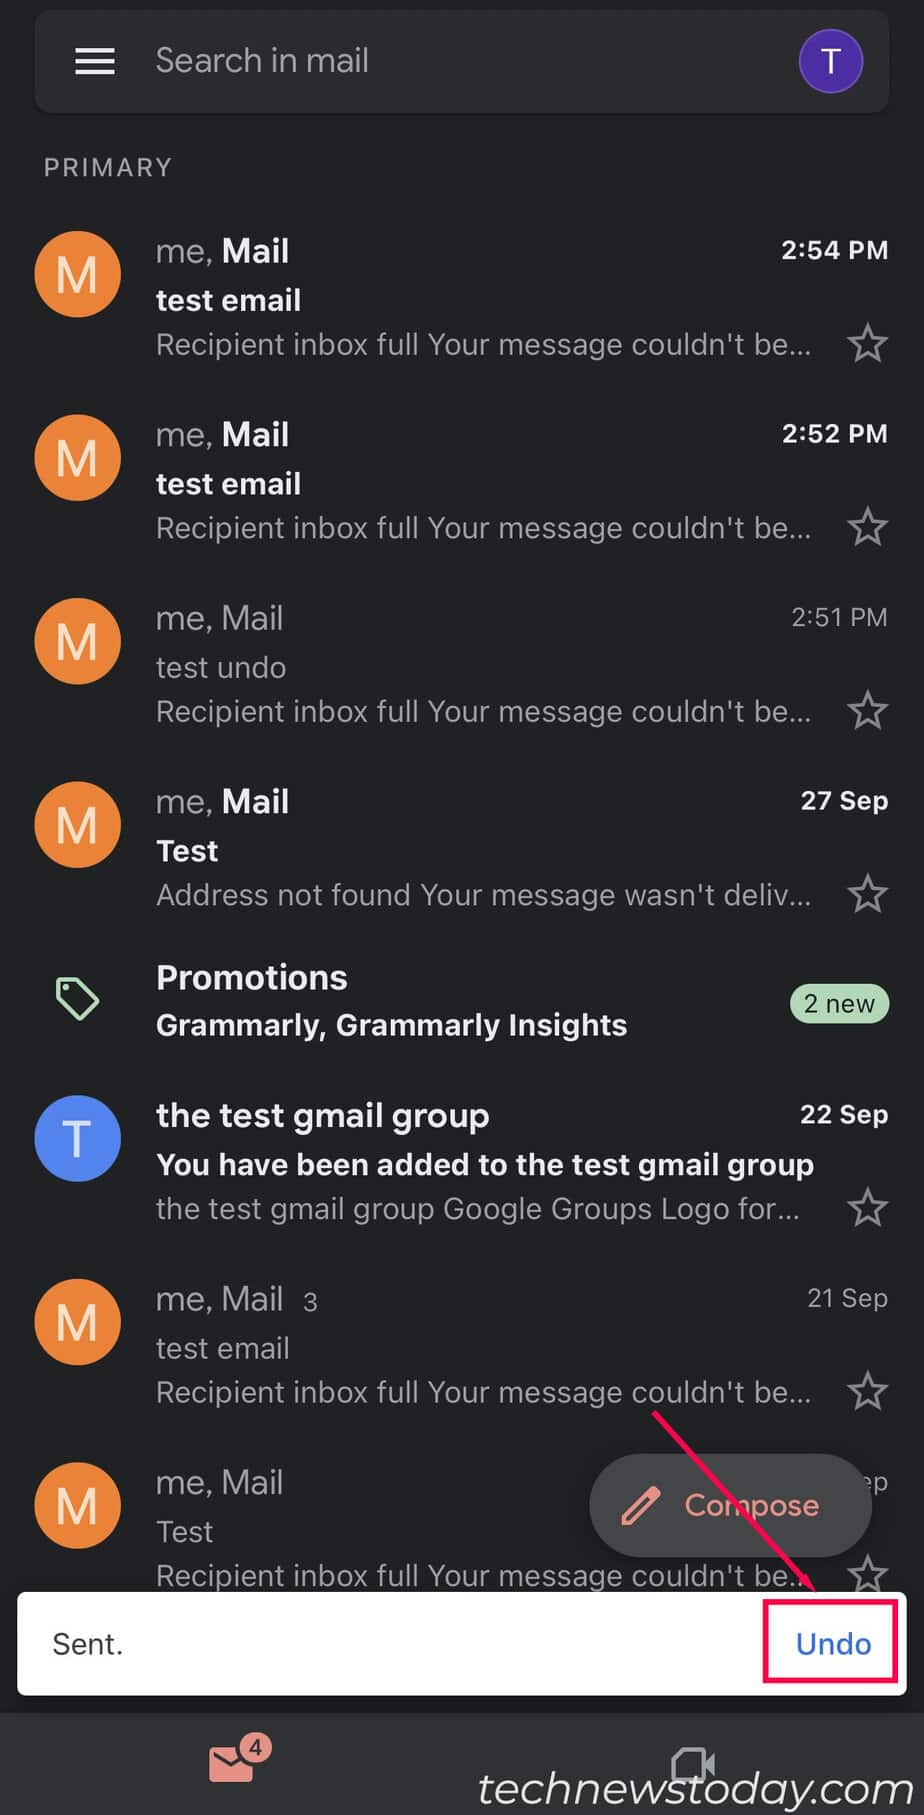 unsend-an-email-in-gmail-app